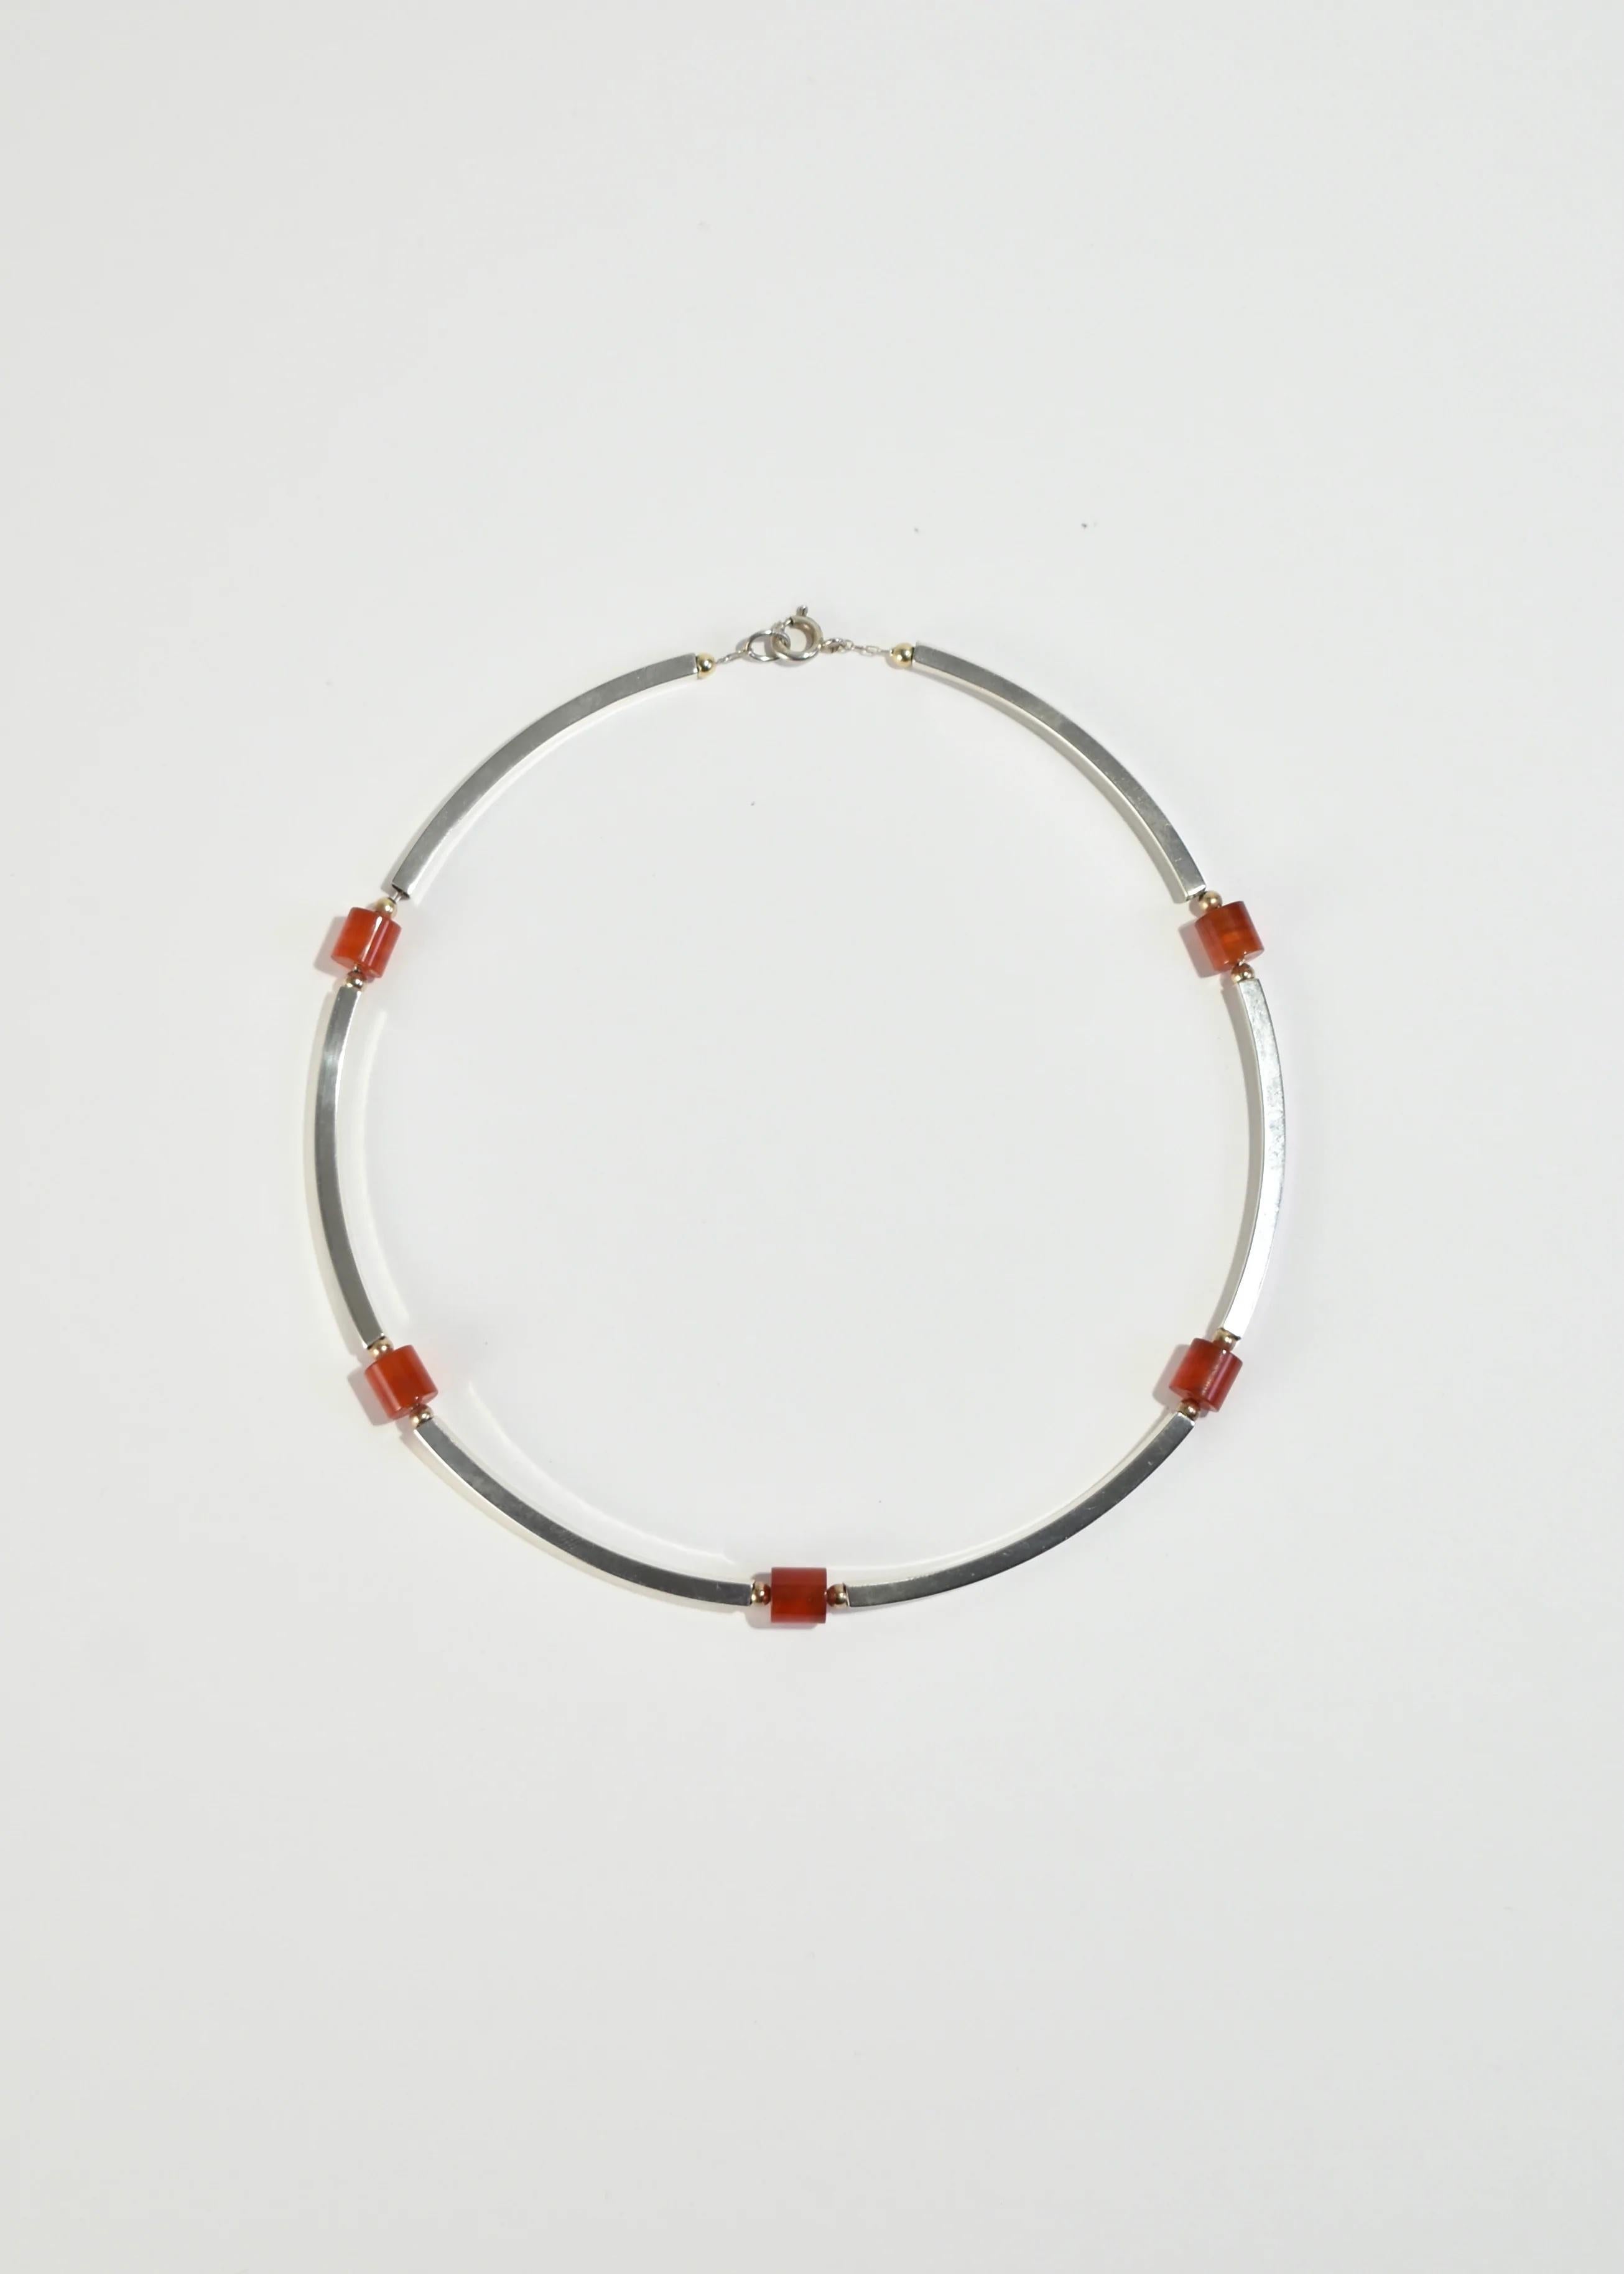 Stunning vintage collar necklace with hollow rectangle detail and polished carnelian beads, clasp closure. Stamped Sterling.

Material: Sterling silver, carnelian.